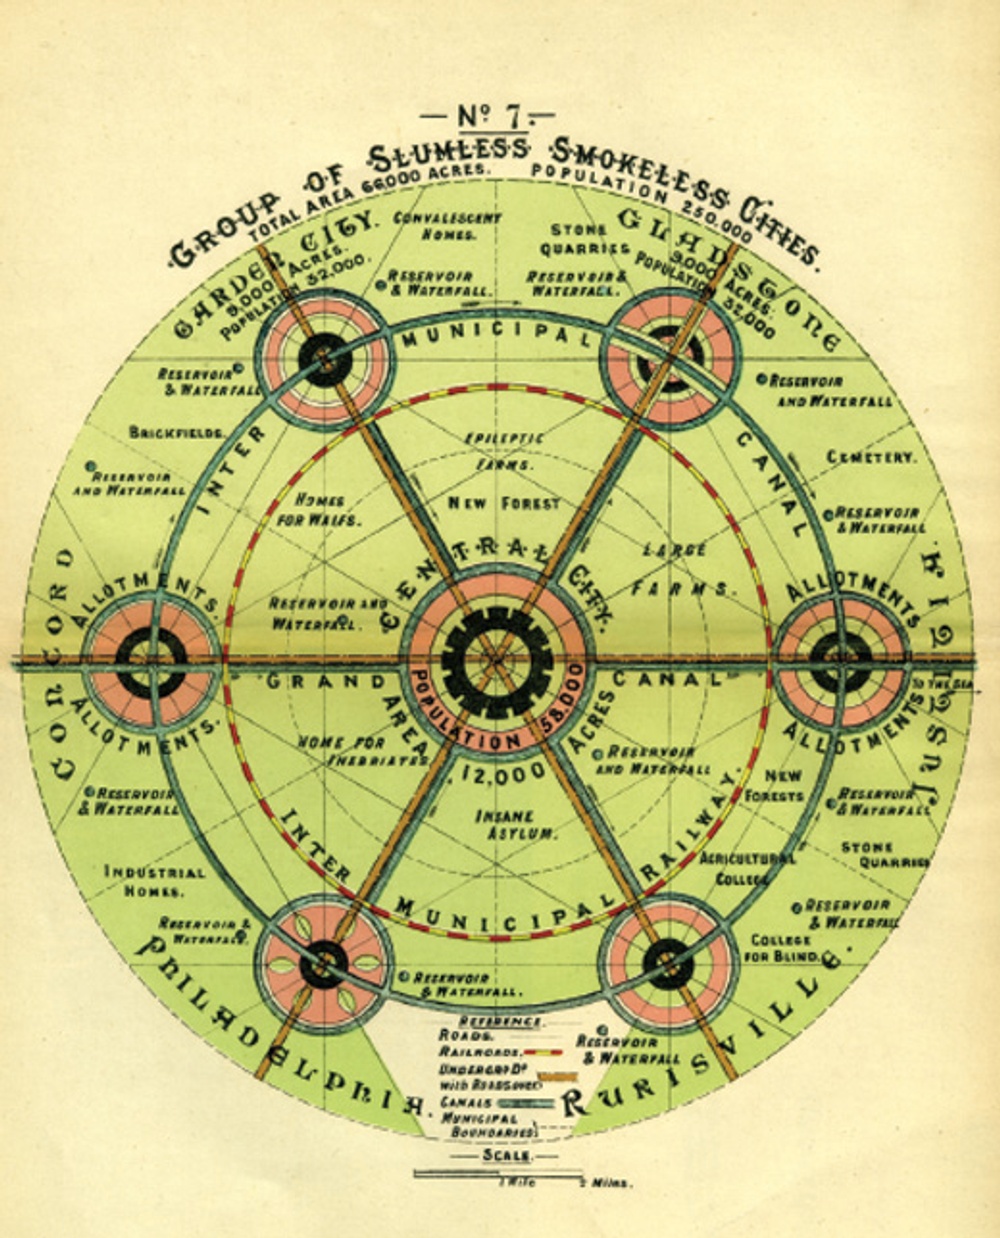 Ebenezer Howard, “Social Cities” diagram of a cluster of towns using the Garden City concept, published in his book "To-Morrow: A Peaceful Path to Real Reform", 1898 © Town and Country Planning Association
